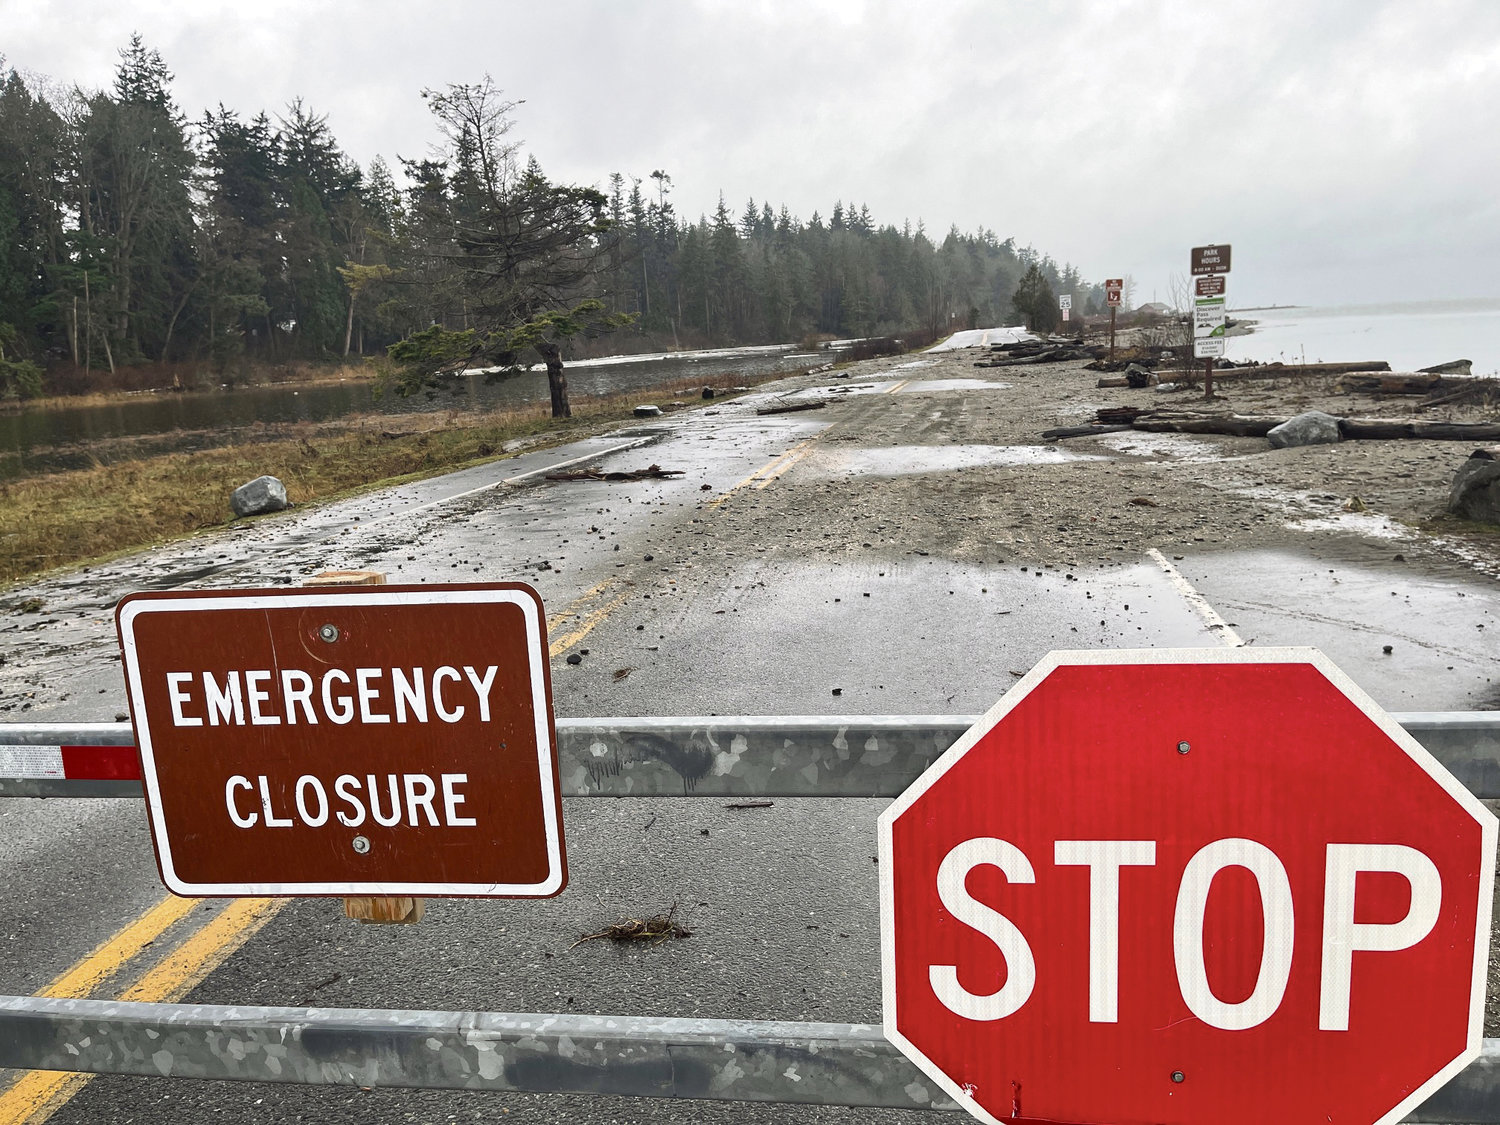 Storm debris and erosion forced Birch Bay Drive to close through Birch Bay State Park.